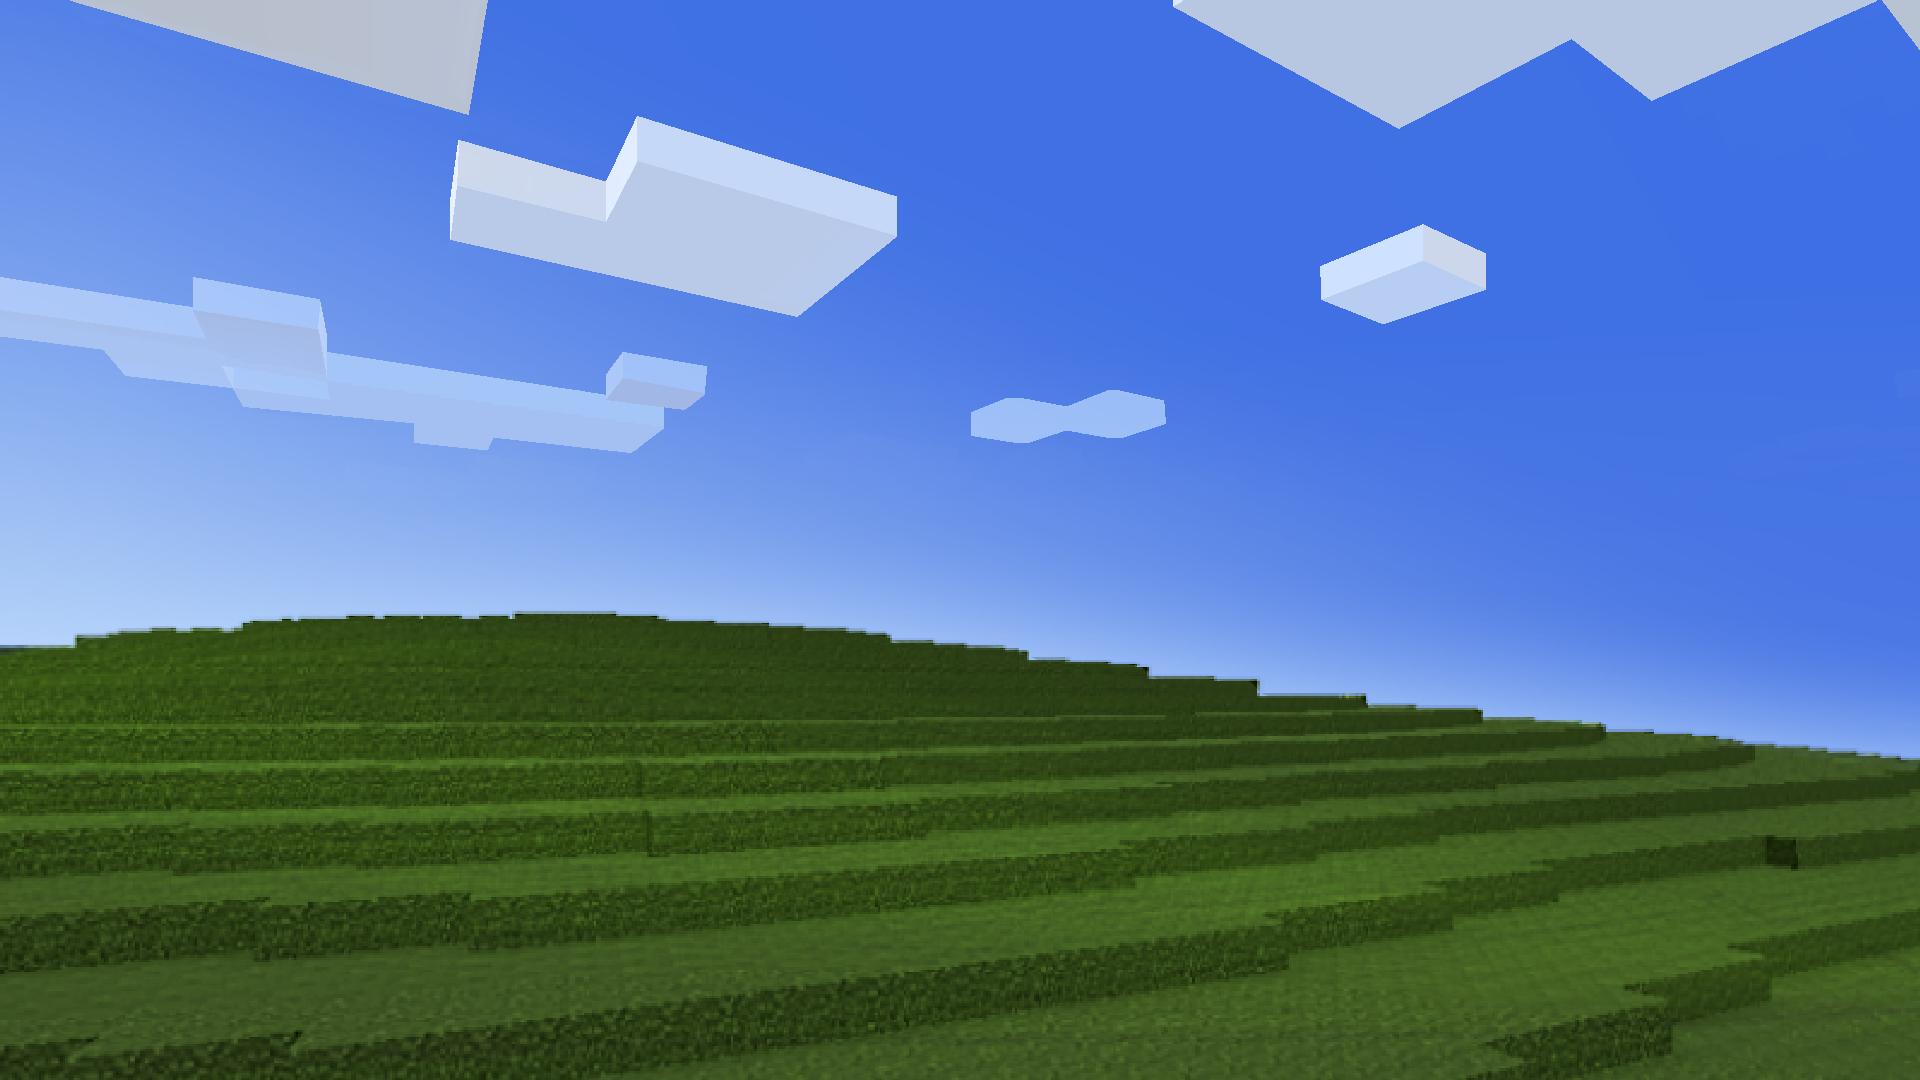 I tried to recreate the Windows XP background, Bliss, in Minecraft